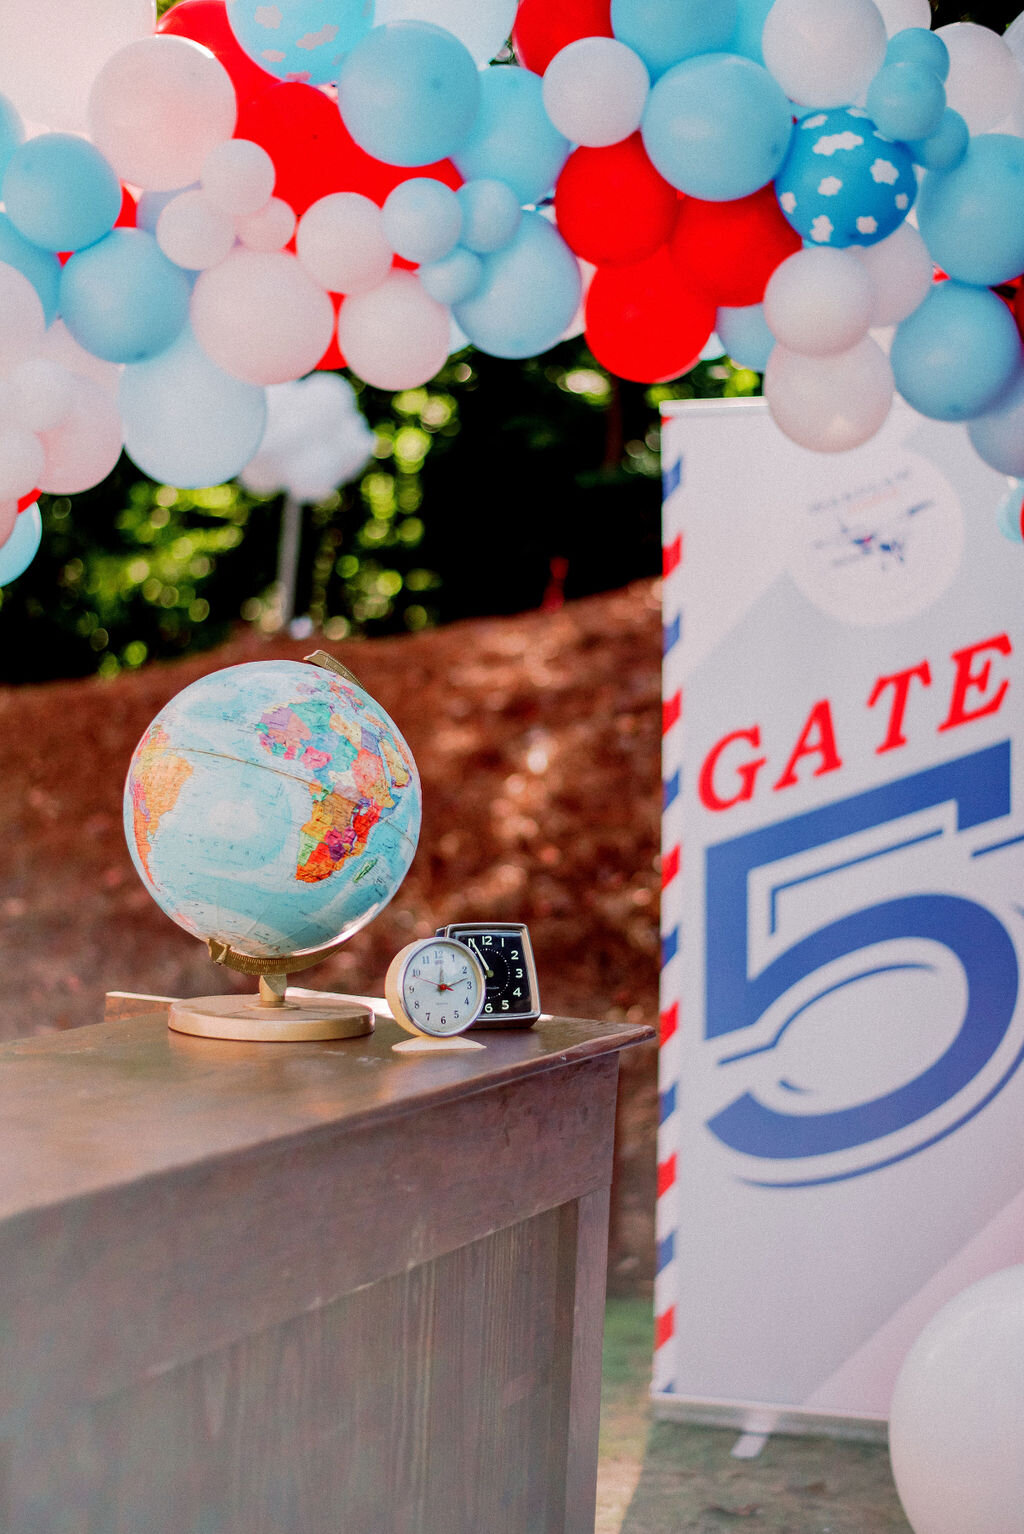 Vintage Airplane Inspired 5th Birthday Party  | Simply Charming Socials | Atlanta Event Planner